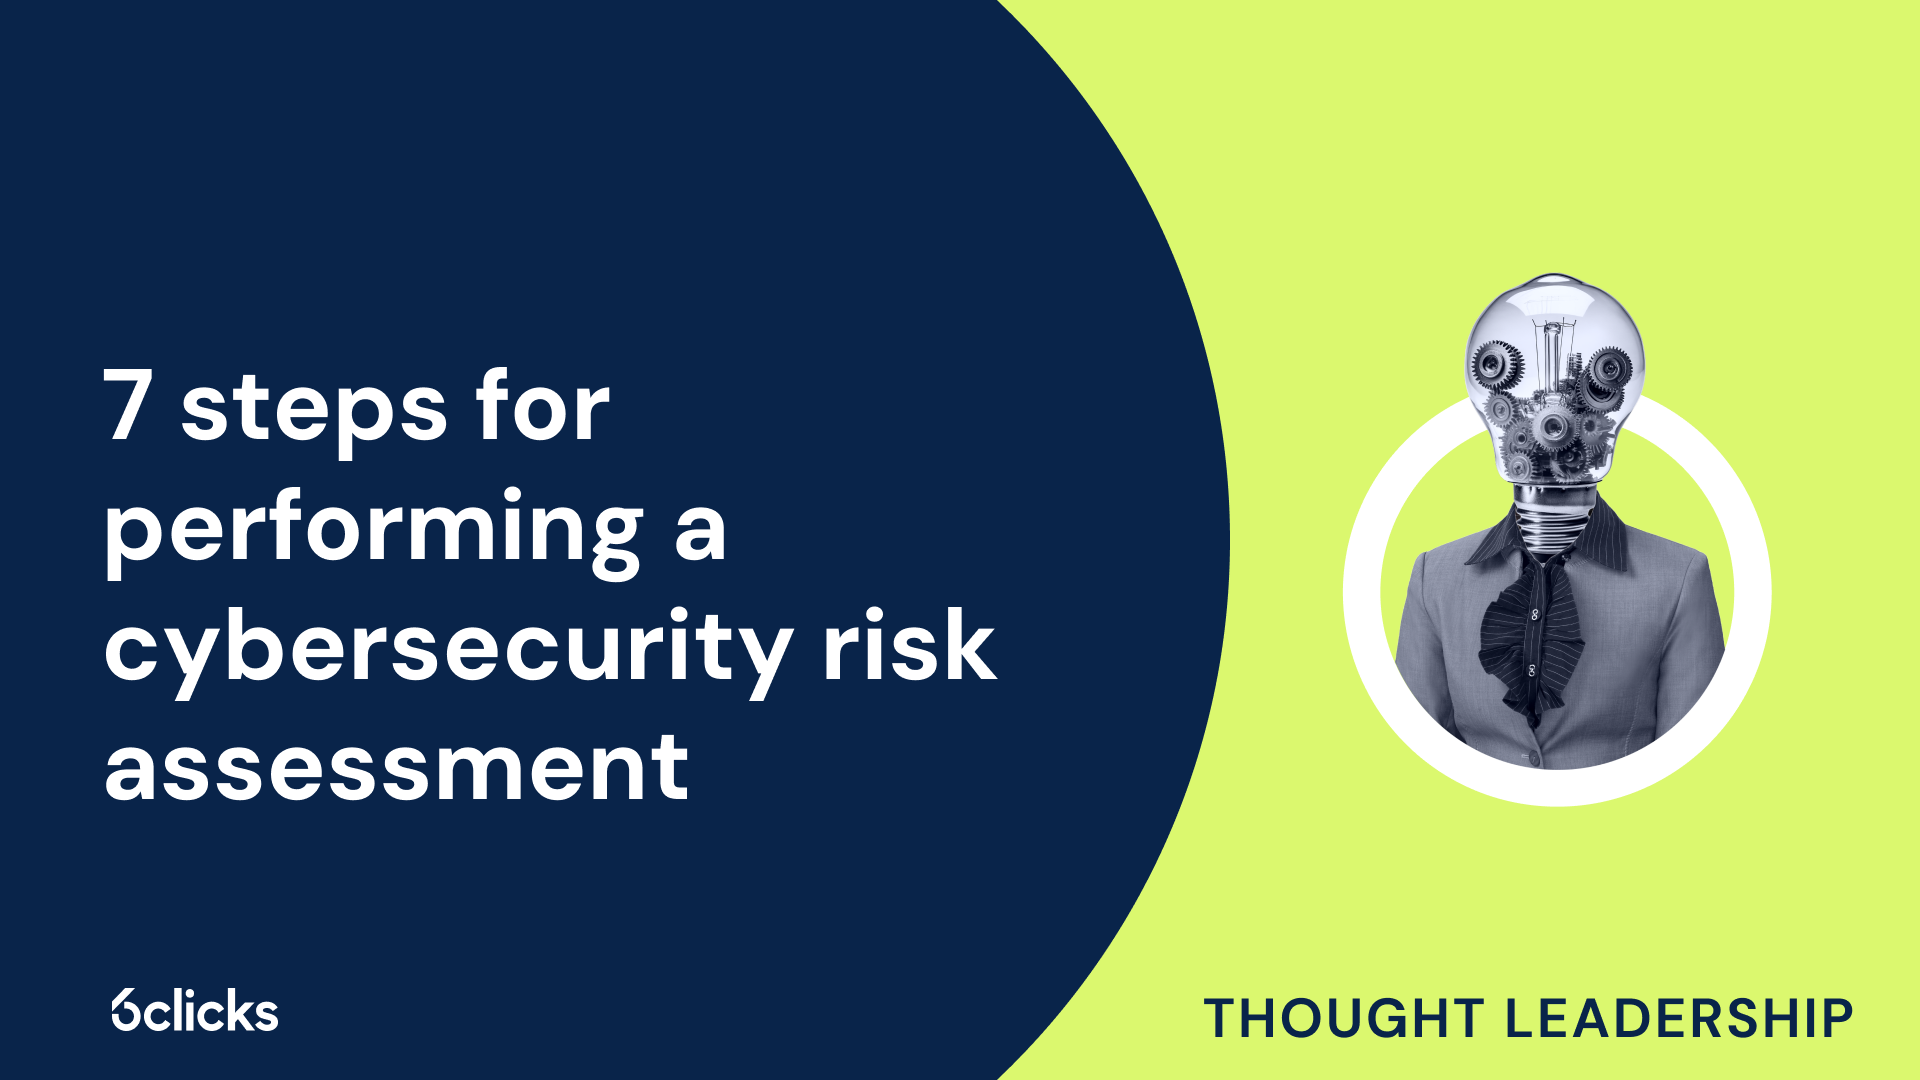 7 steps for performing a cybersecurity risk assessment